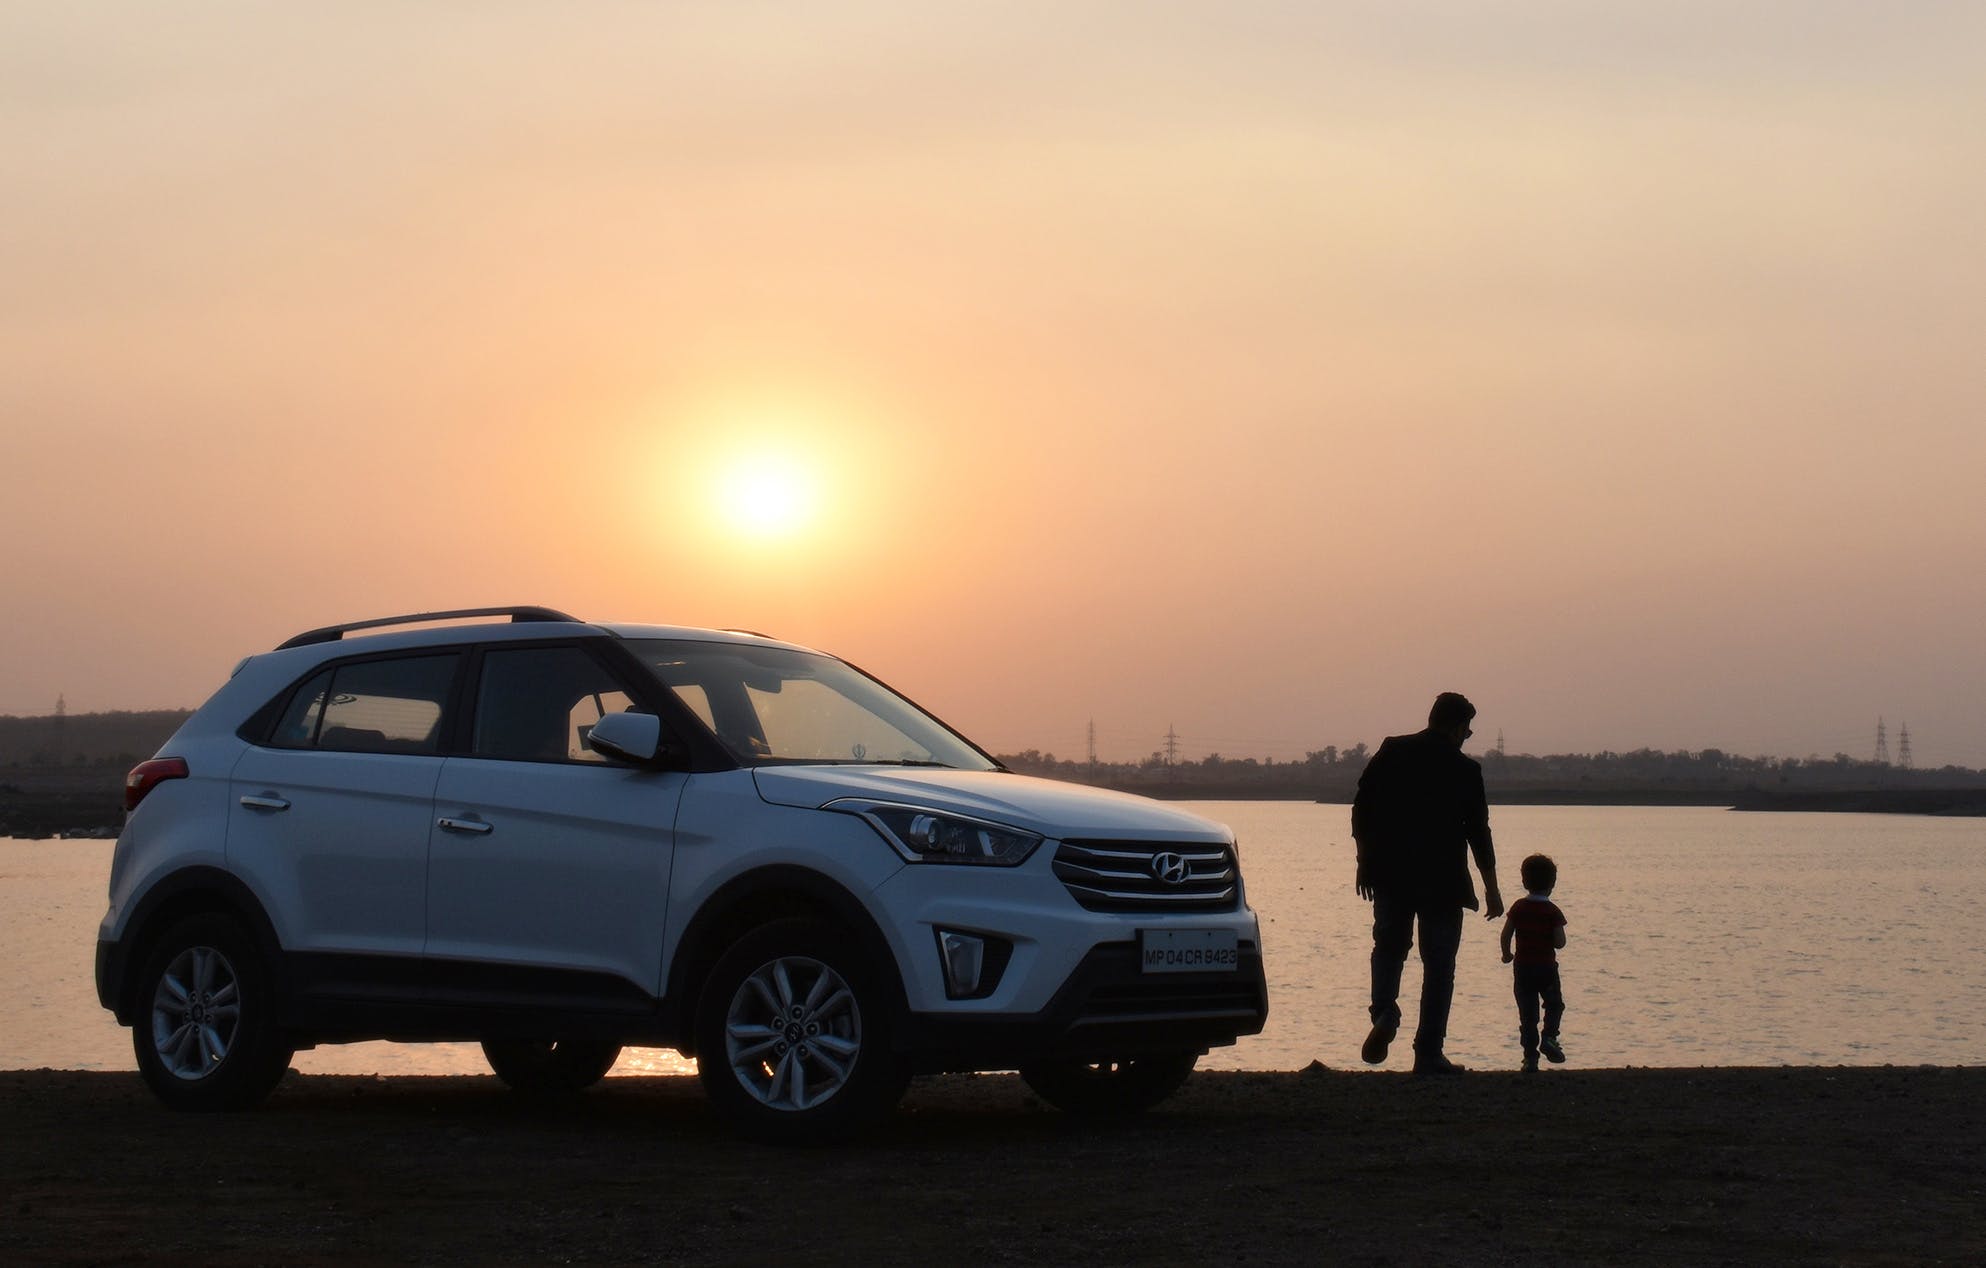 Father and child next to a car at sunset